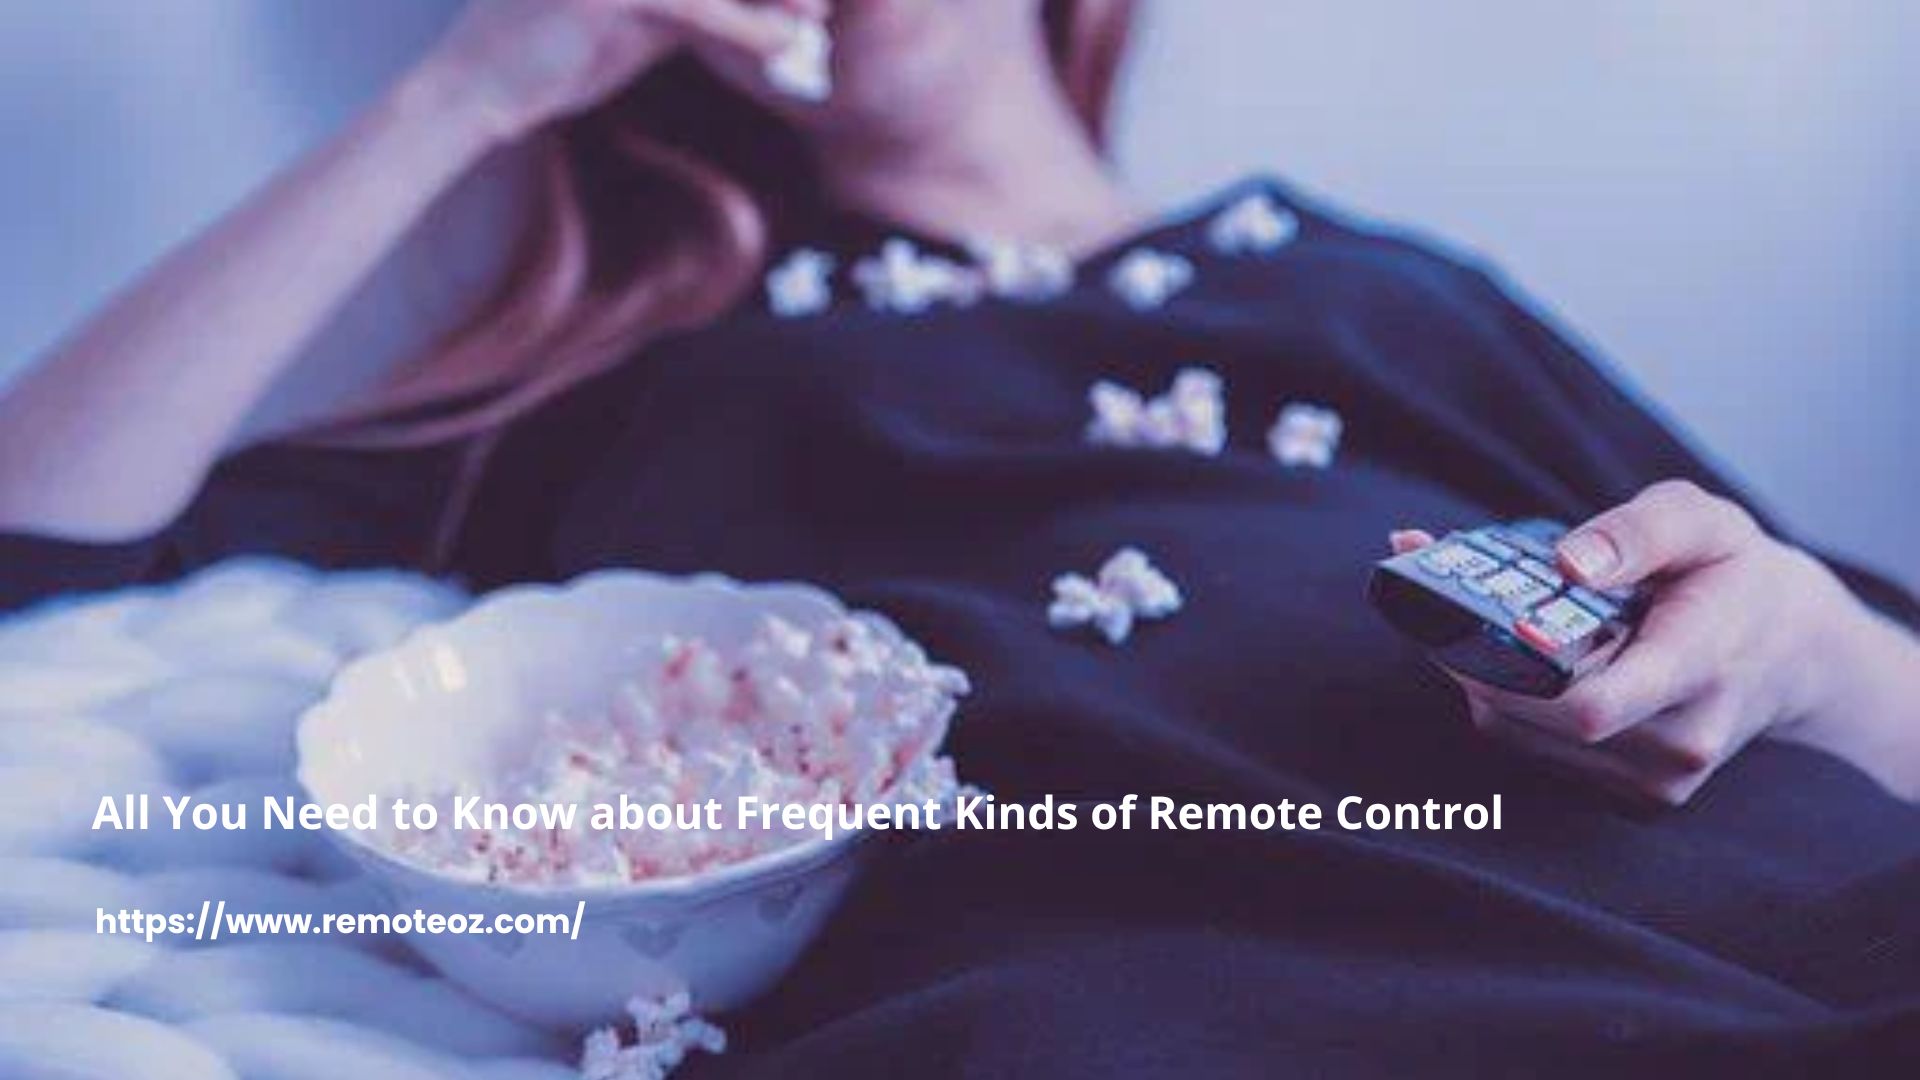 All You Need to Know about Frequent Kinds of Remote Control - AtoAllinks